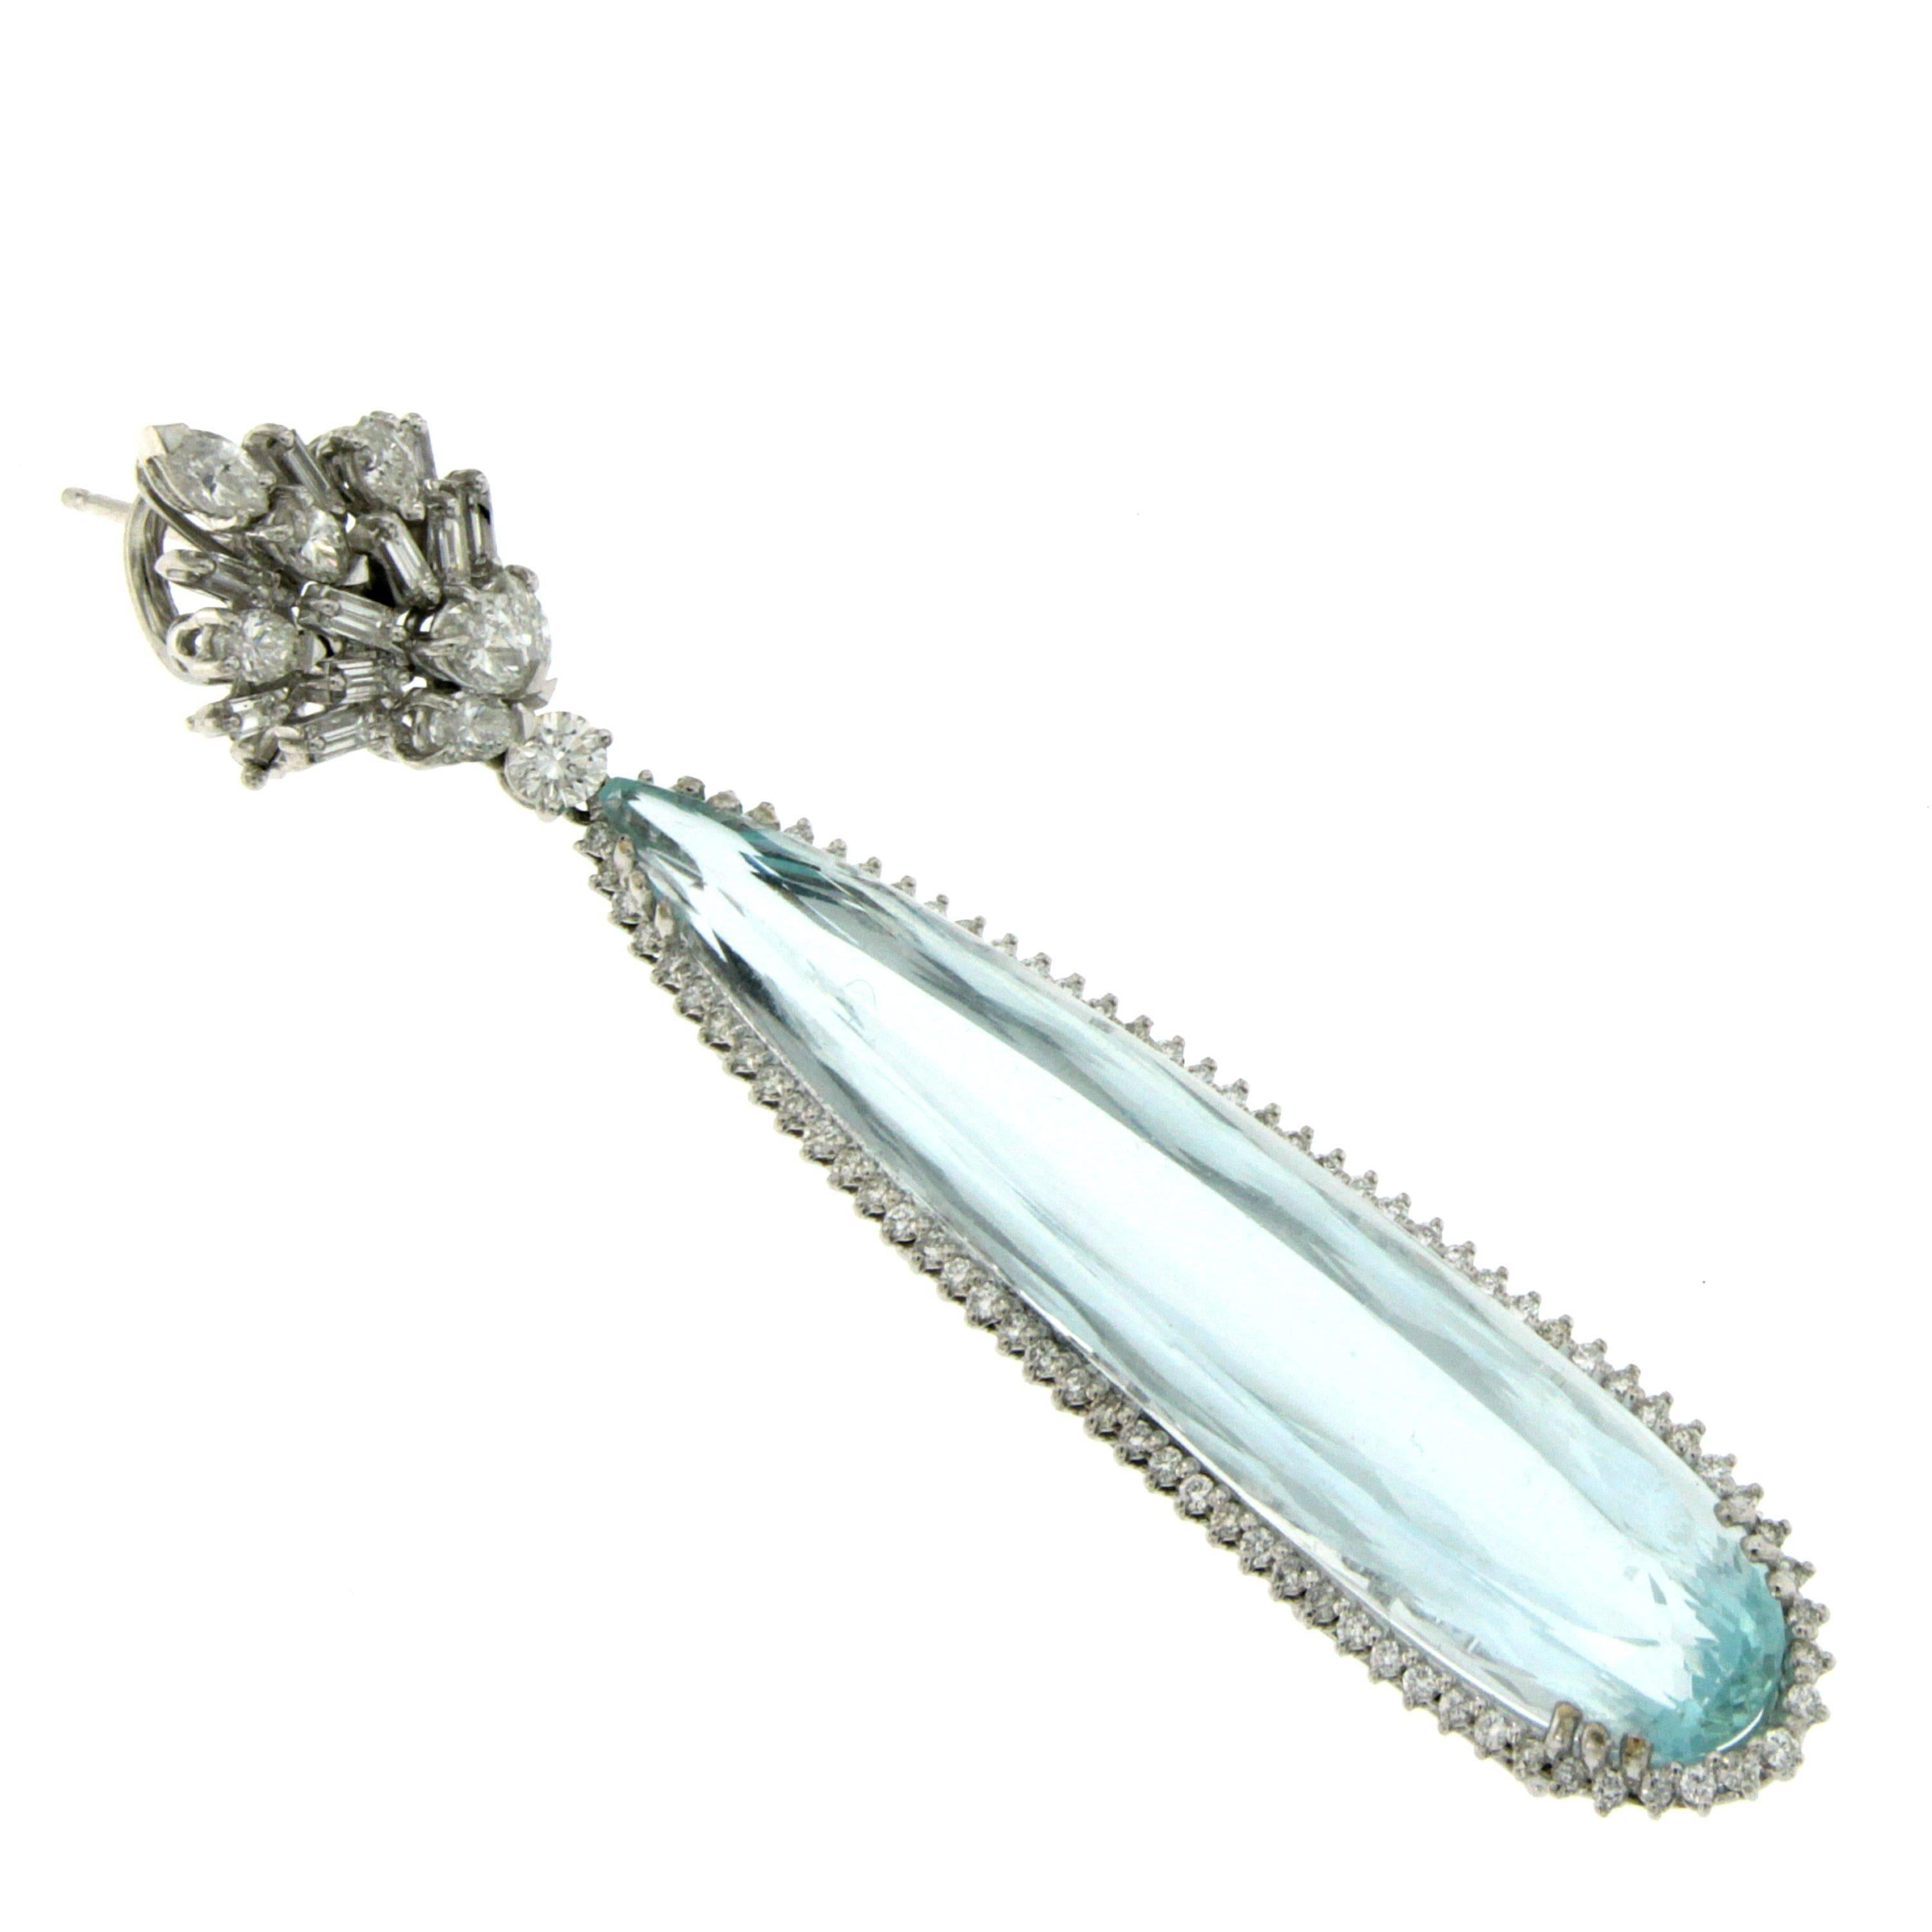 Substantial in size and spectacular in appearance, this stunning pair of earrings is set in 18k White Gold and features two beautiful long pear shaped Aquamarine weighing a total of approximately 60 cts surrounded by micro set white diamonds,